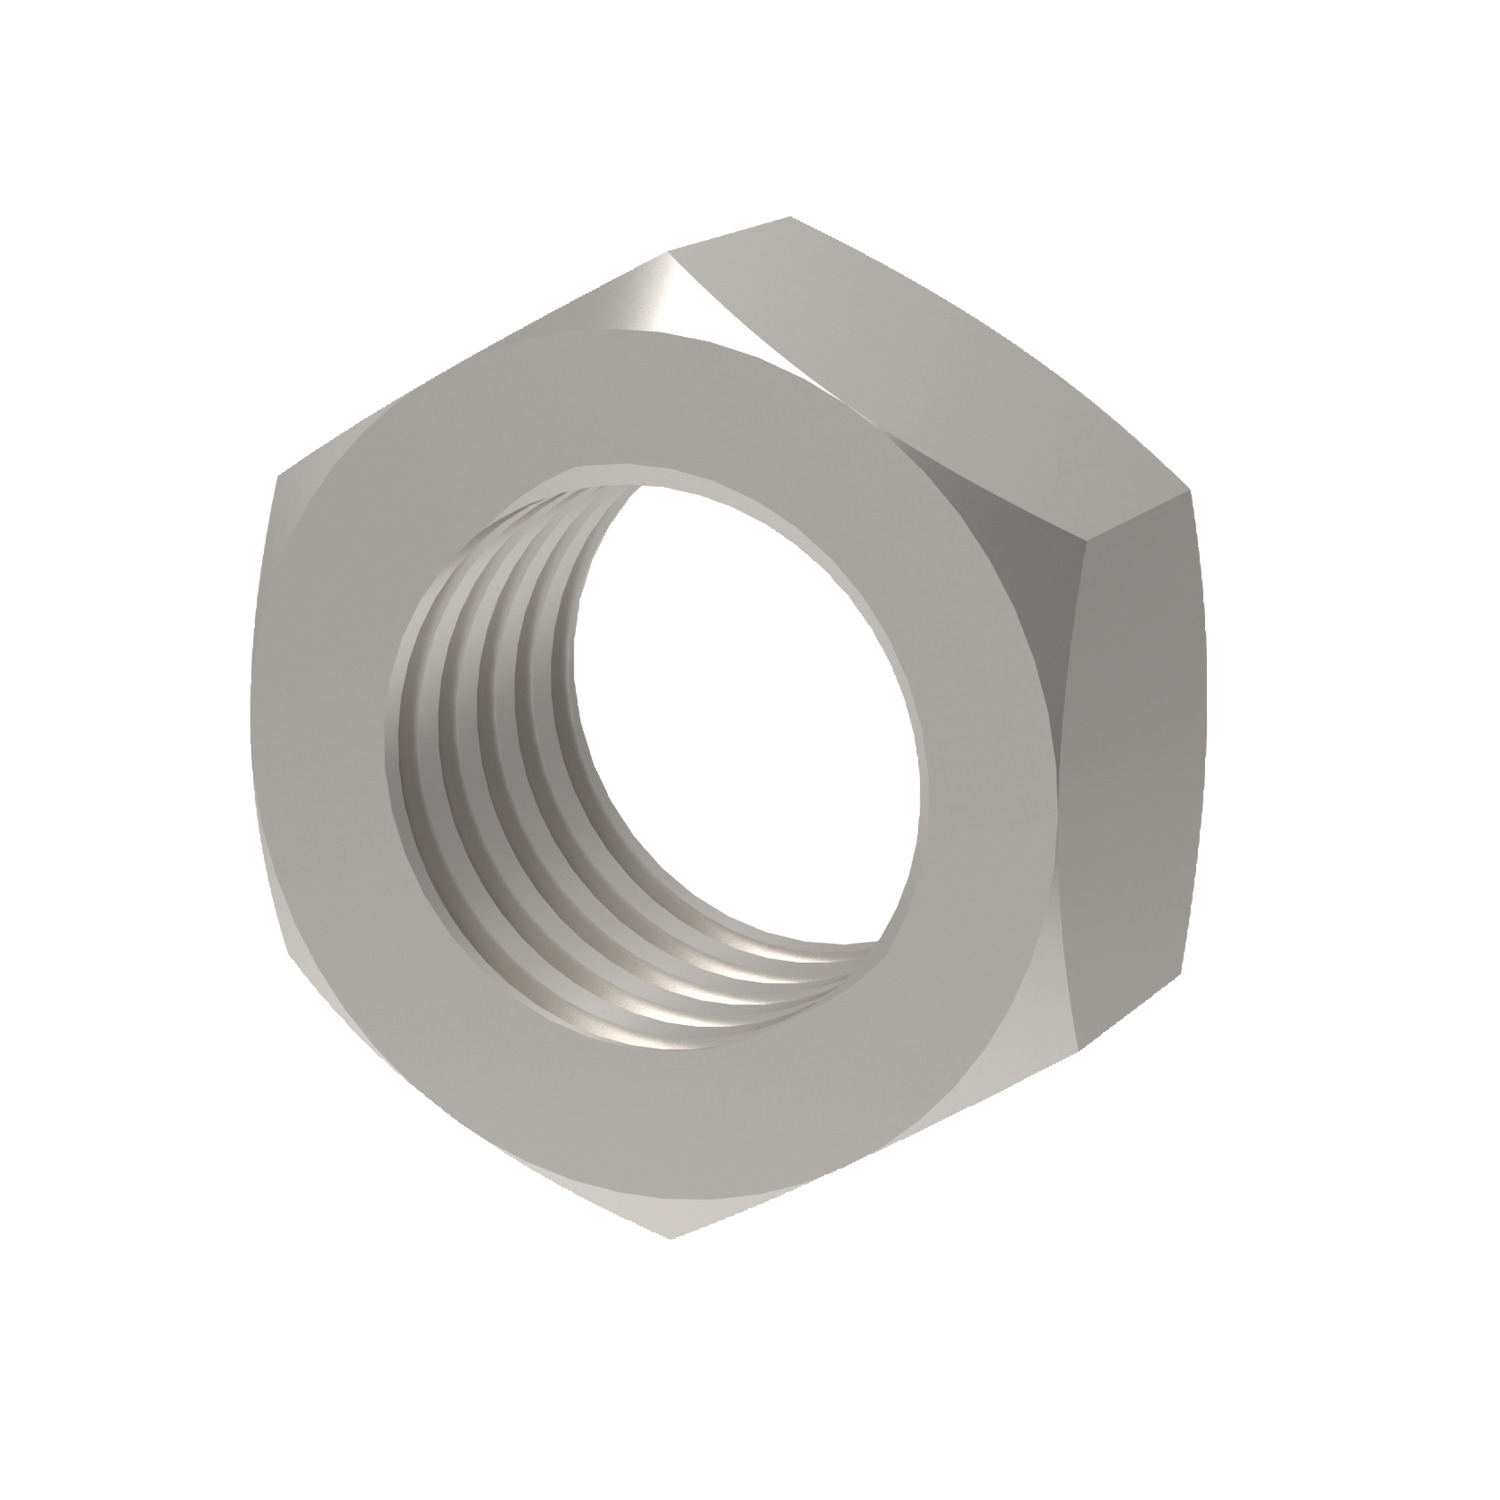 Lock Nuts Fine Thread A4 Stainless steel lock nuts - Fine thread. Ranging from sizes M8 to M36. Manufactured to DIN 439.